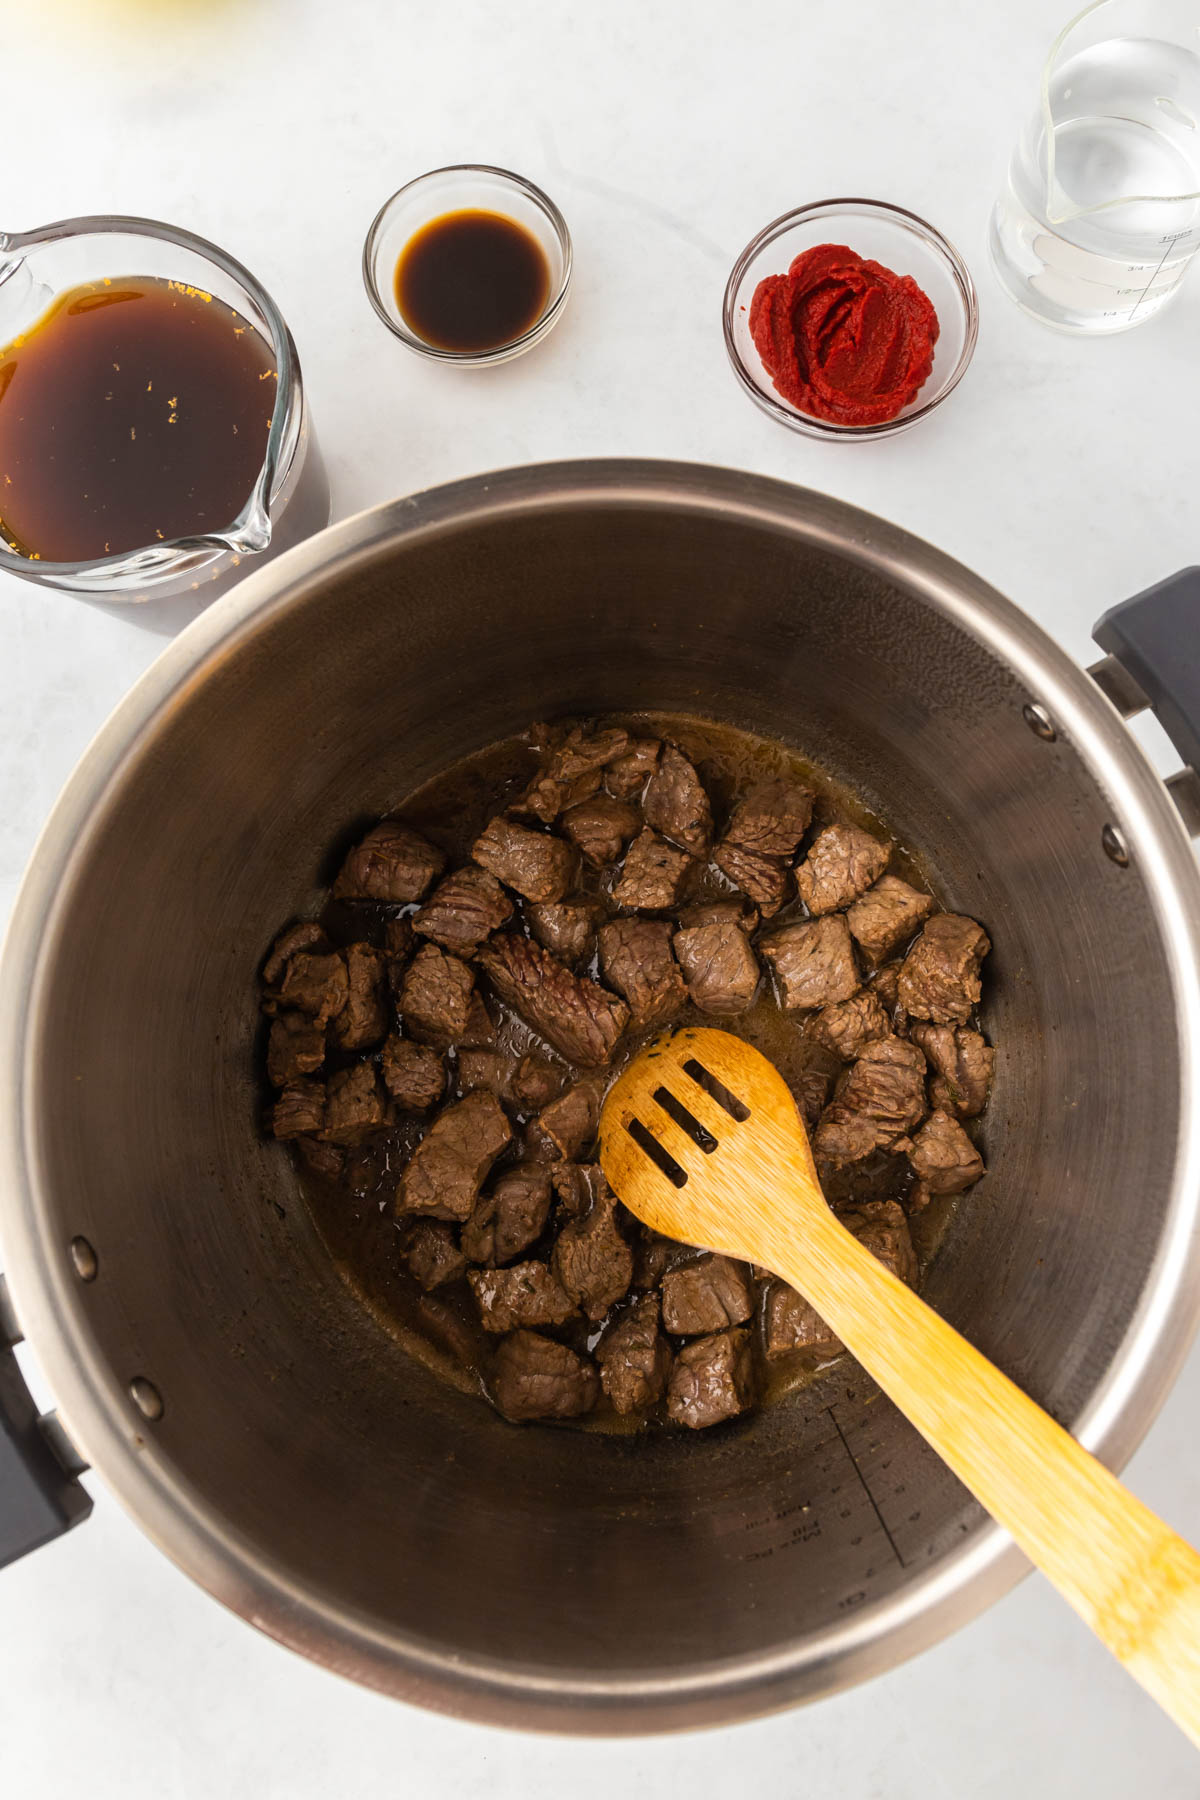 Beef is sauteed in an instant pot. A wooden spoon is visible in the pot, and spices in individual bowls are arranged around it.